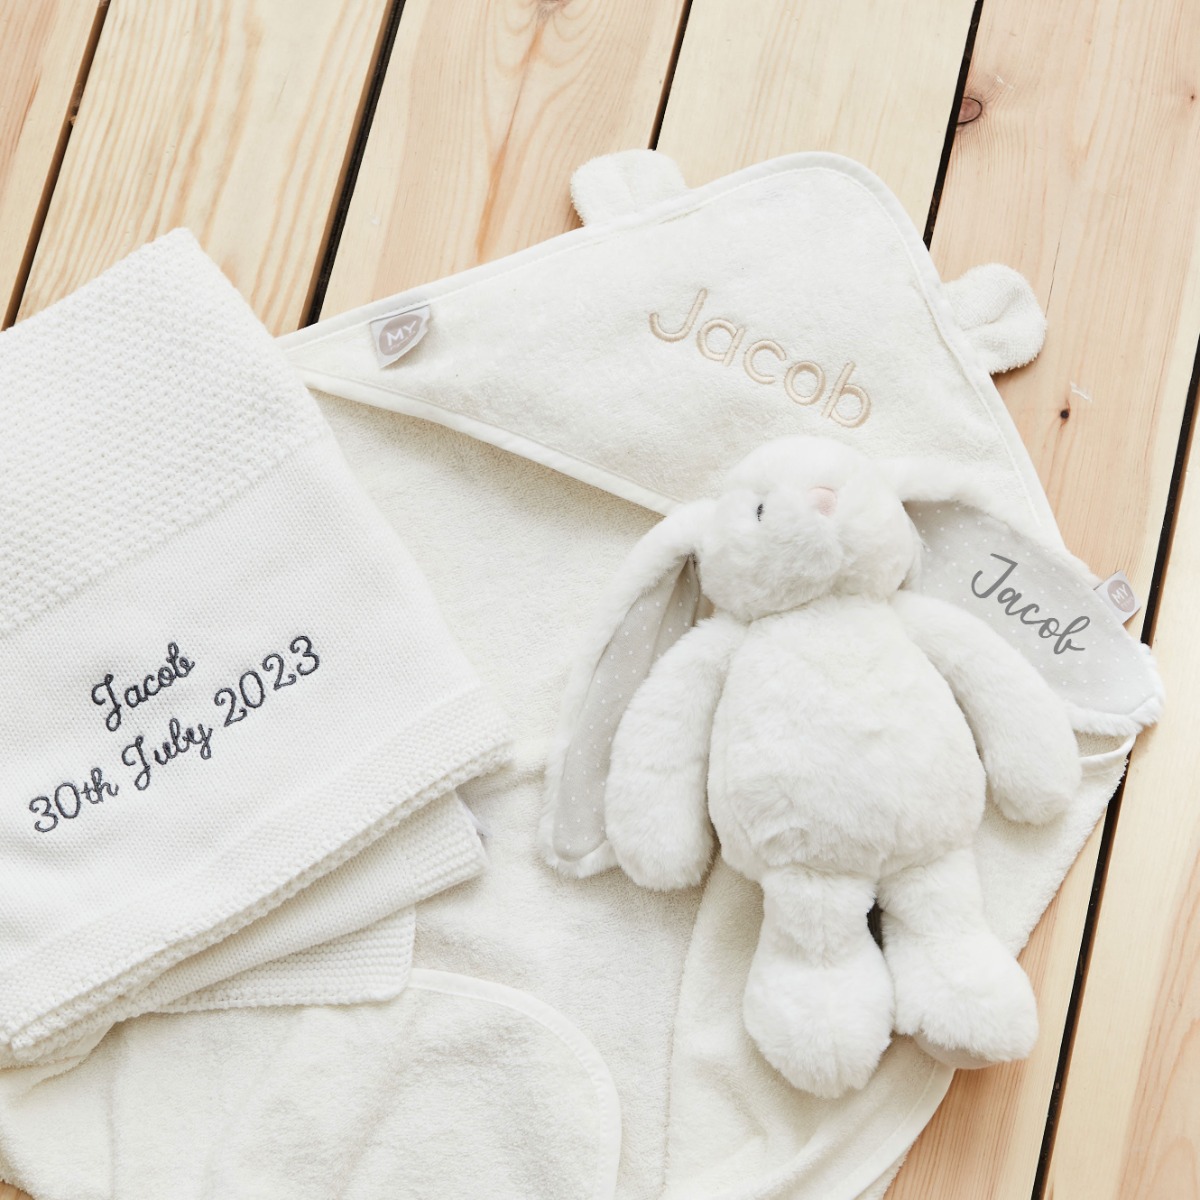 Personalised New Baby Essentials Gift Set - Neutral